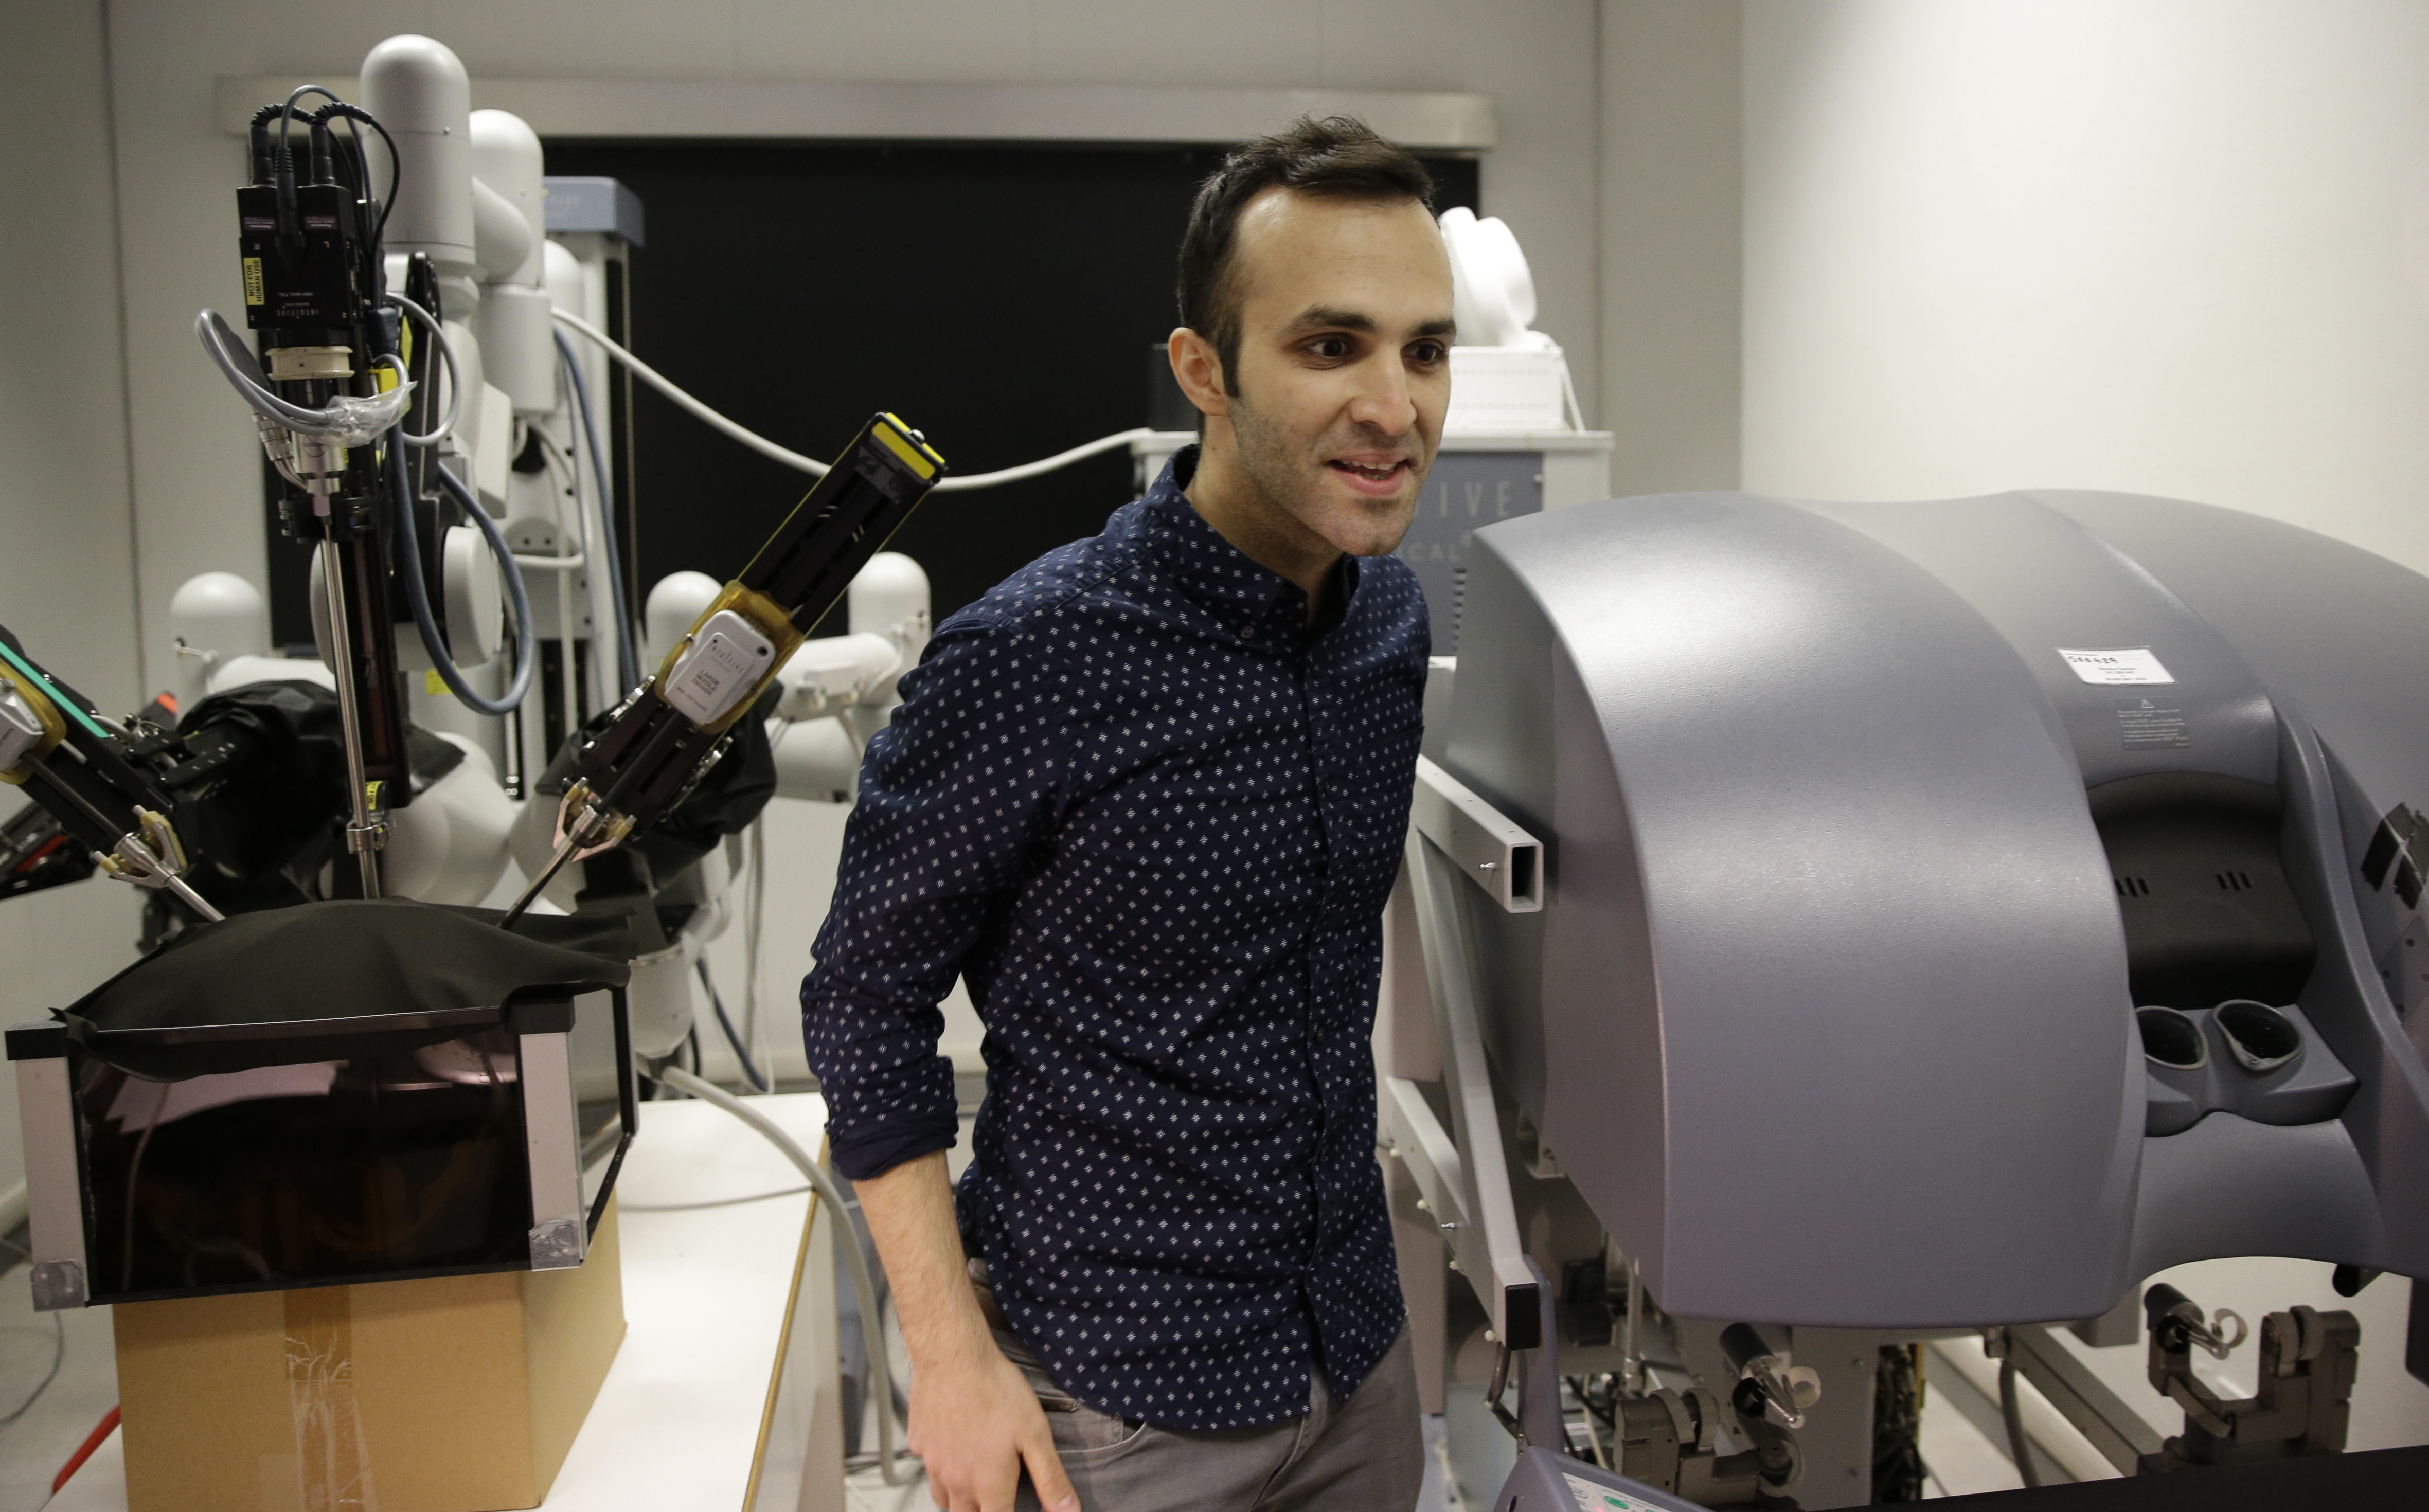 Iranian-born bioengineer researcher Nima Enayati stands as he works on a robotic surgery machine during an interview with the Associated Press at the Polytechnic University of Milan, Italy, Tuesday, Jan. 31, 2017. An Iranian researcher at Milan's Polytechnic University, Enayati was refused check-in Monday at Milan's Malpensa Airport for his U.S.-bound flight on Turkish Airlines after the Trump administration's executive order came down.